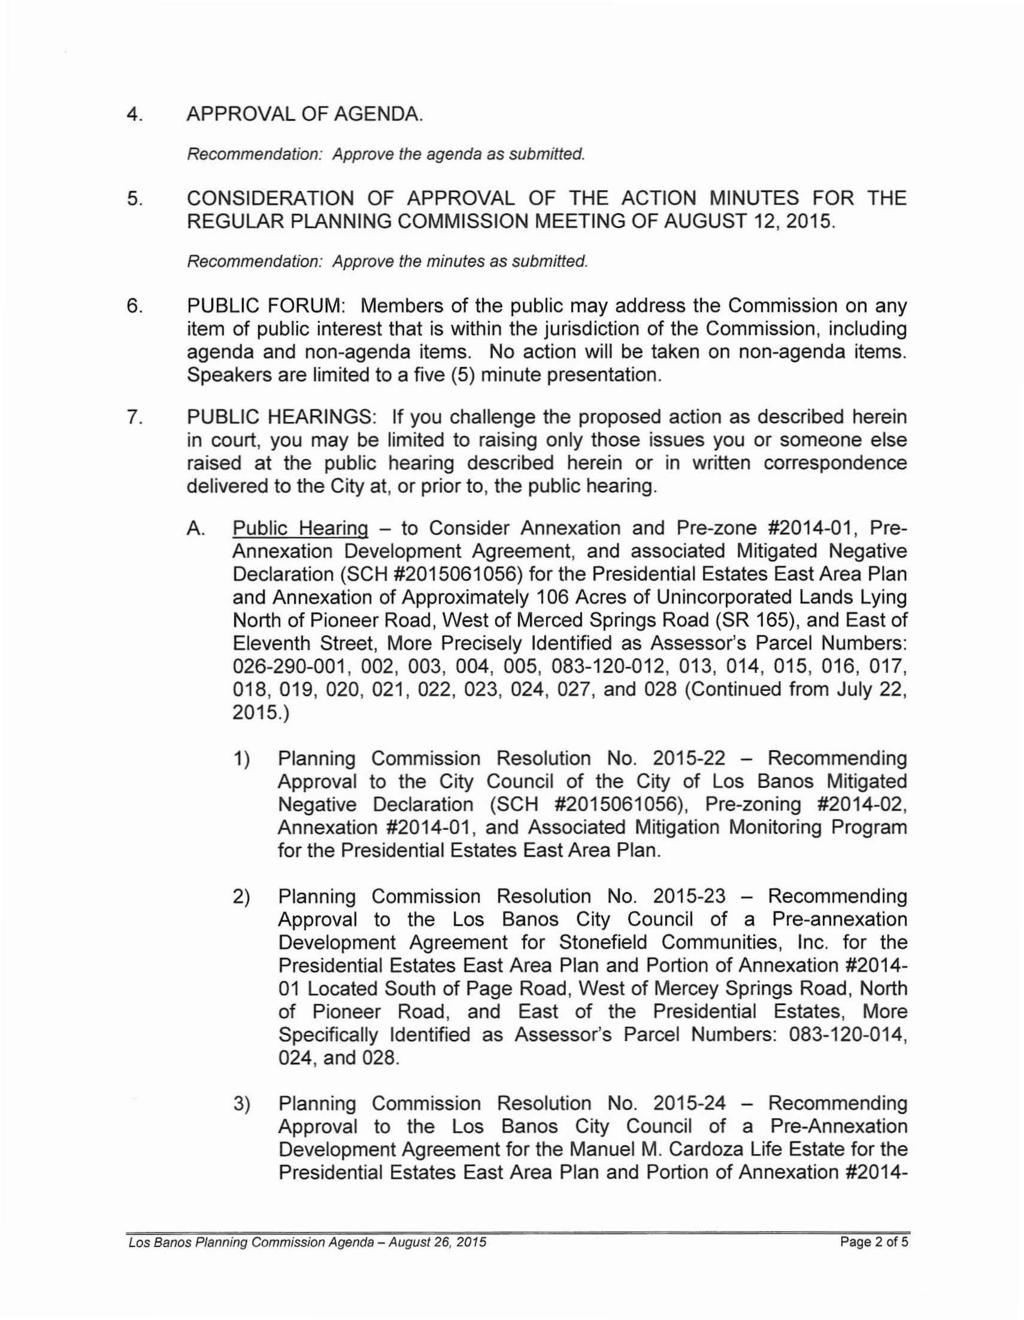 4. APPROVAL OF AGENDA. Recommendation: Approve the agenda as submitted. 5. CONSIDERATION OF APPROVAL OF THE ACTION MINUTES FOR THE REGULAR PLANNING COMMISSION MEETING OF AUGUST 12, 2015.